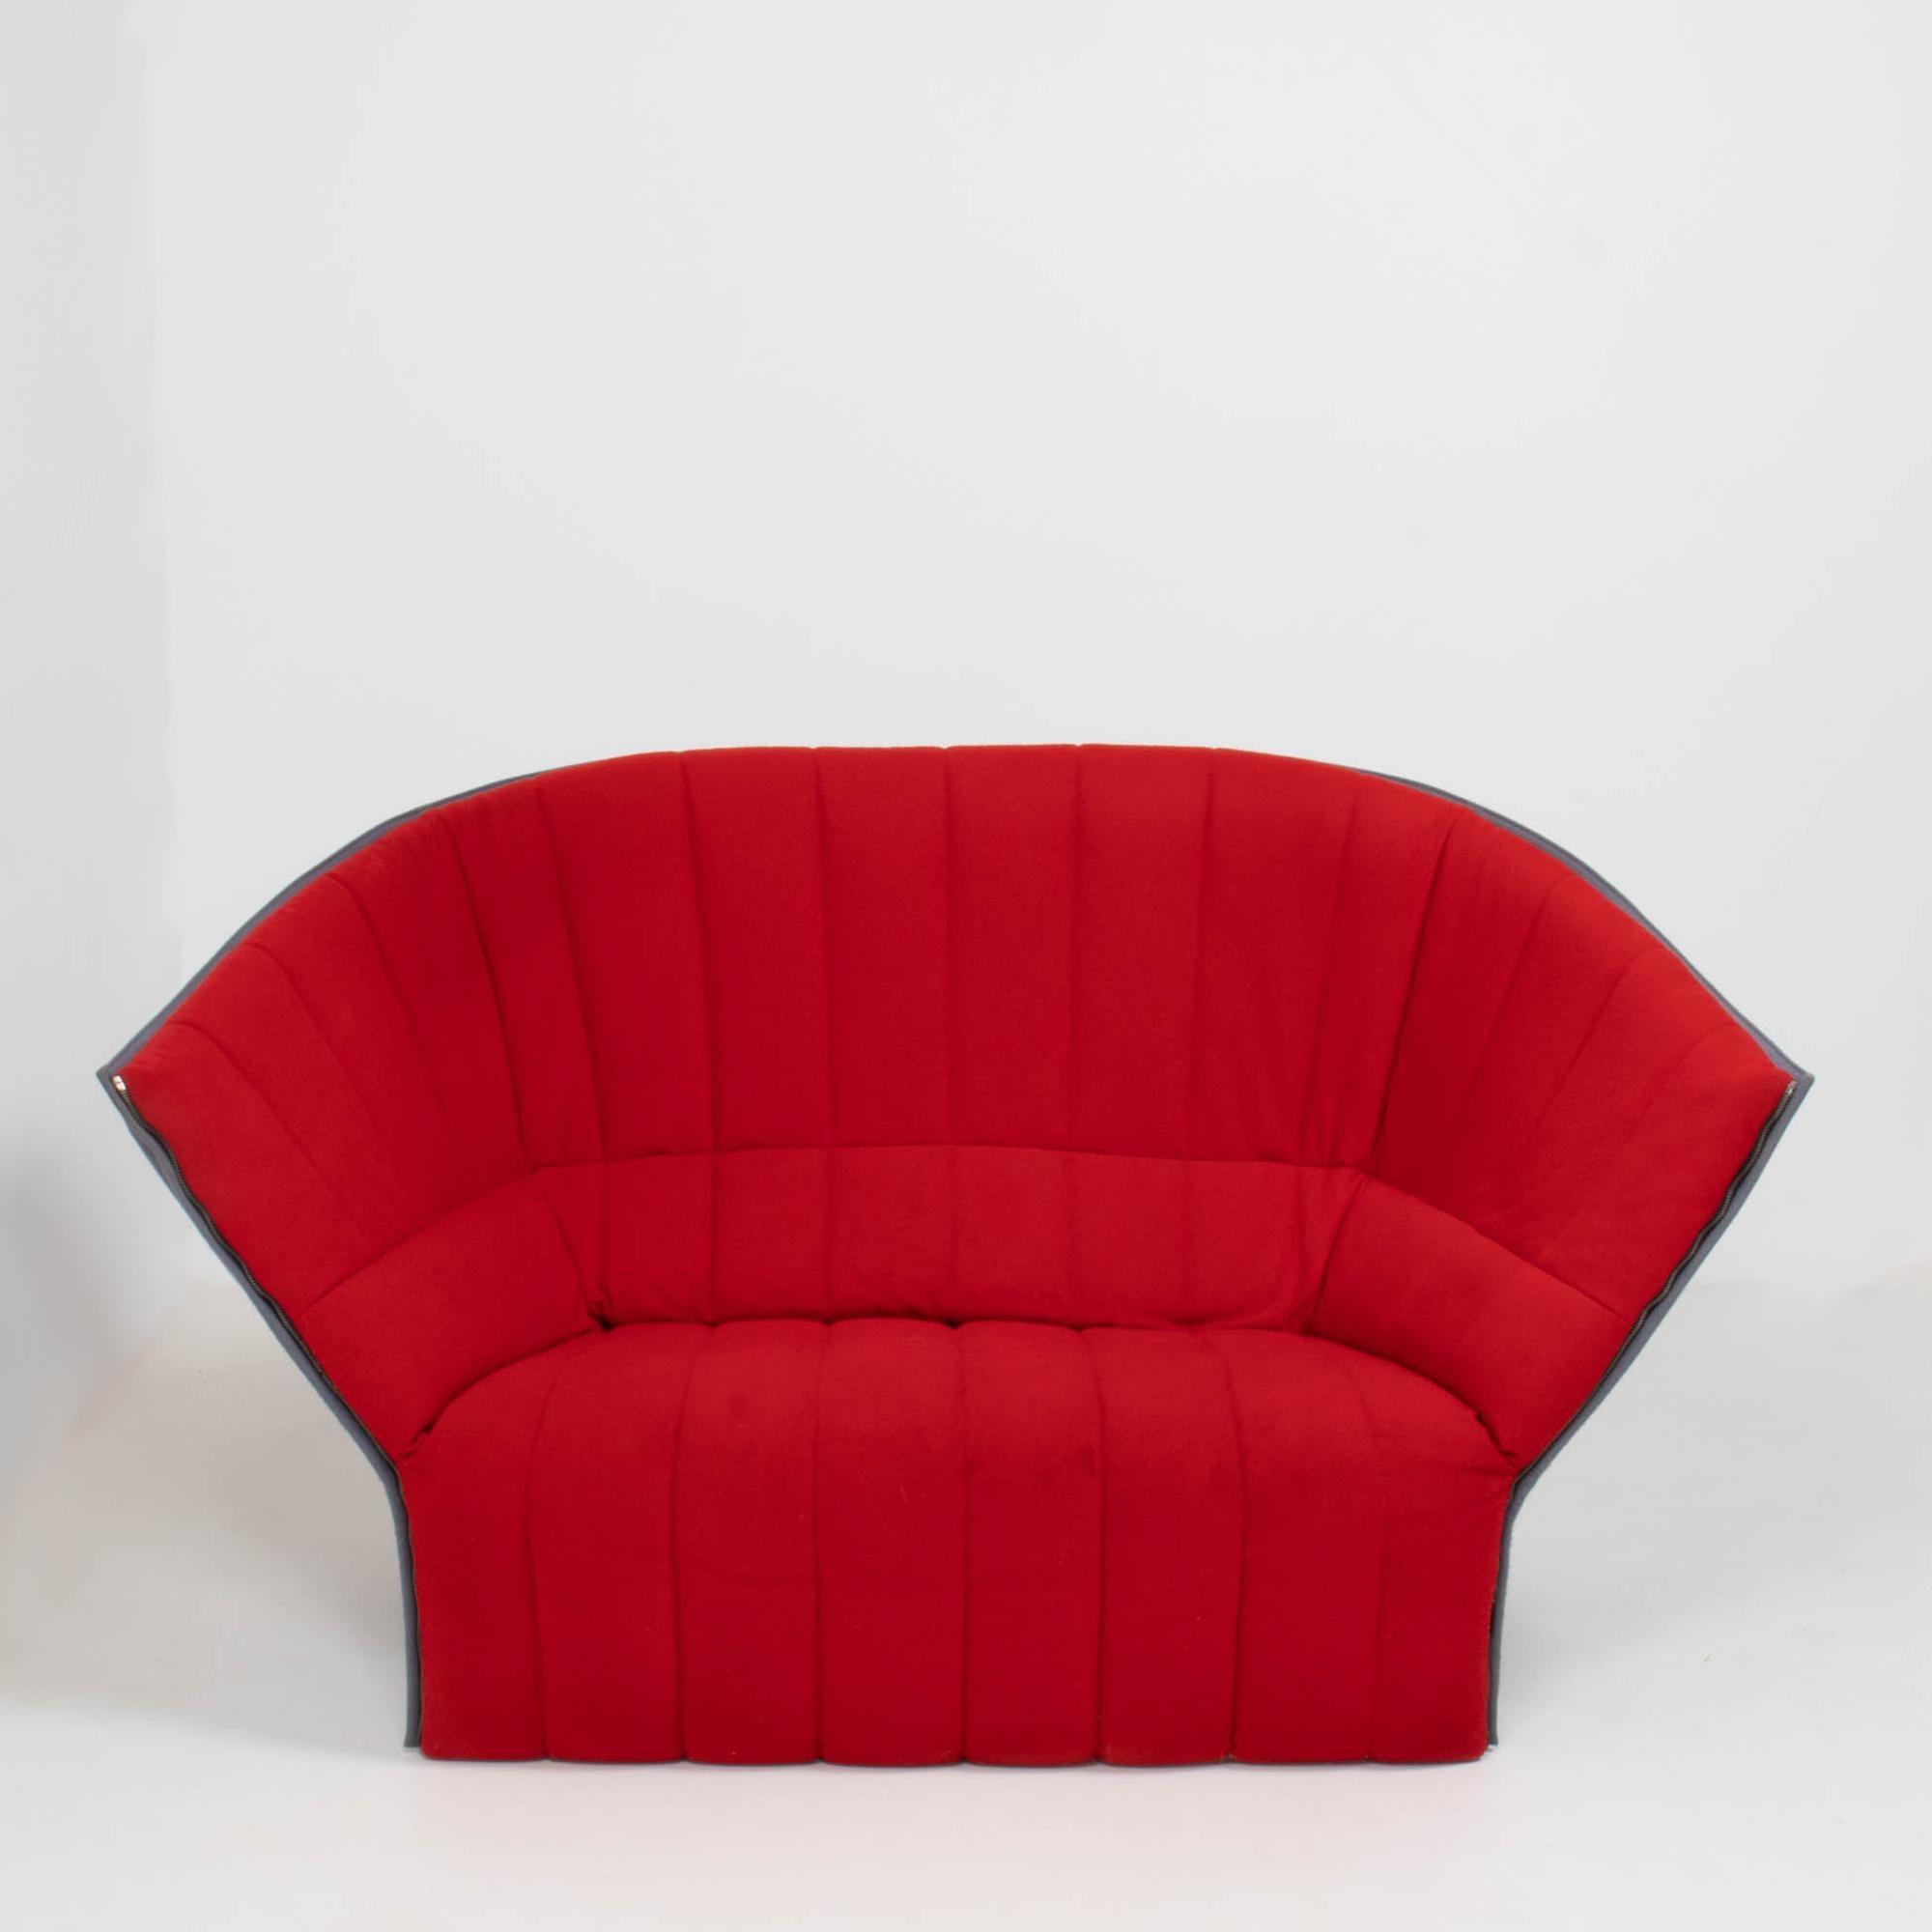 Designed by Inga Sempé for Ligne Roset, the Moel loveseat is a striking piece of contemporary design.

With a shell-like silhouette, the Moel loveseat sofa features a quilted seat front in bright red fabric and a contrasting grey fabric